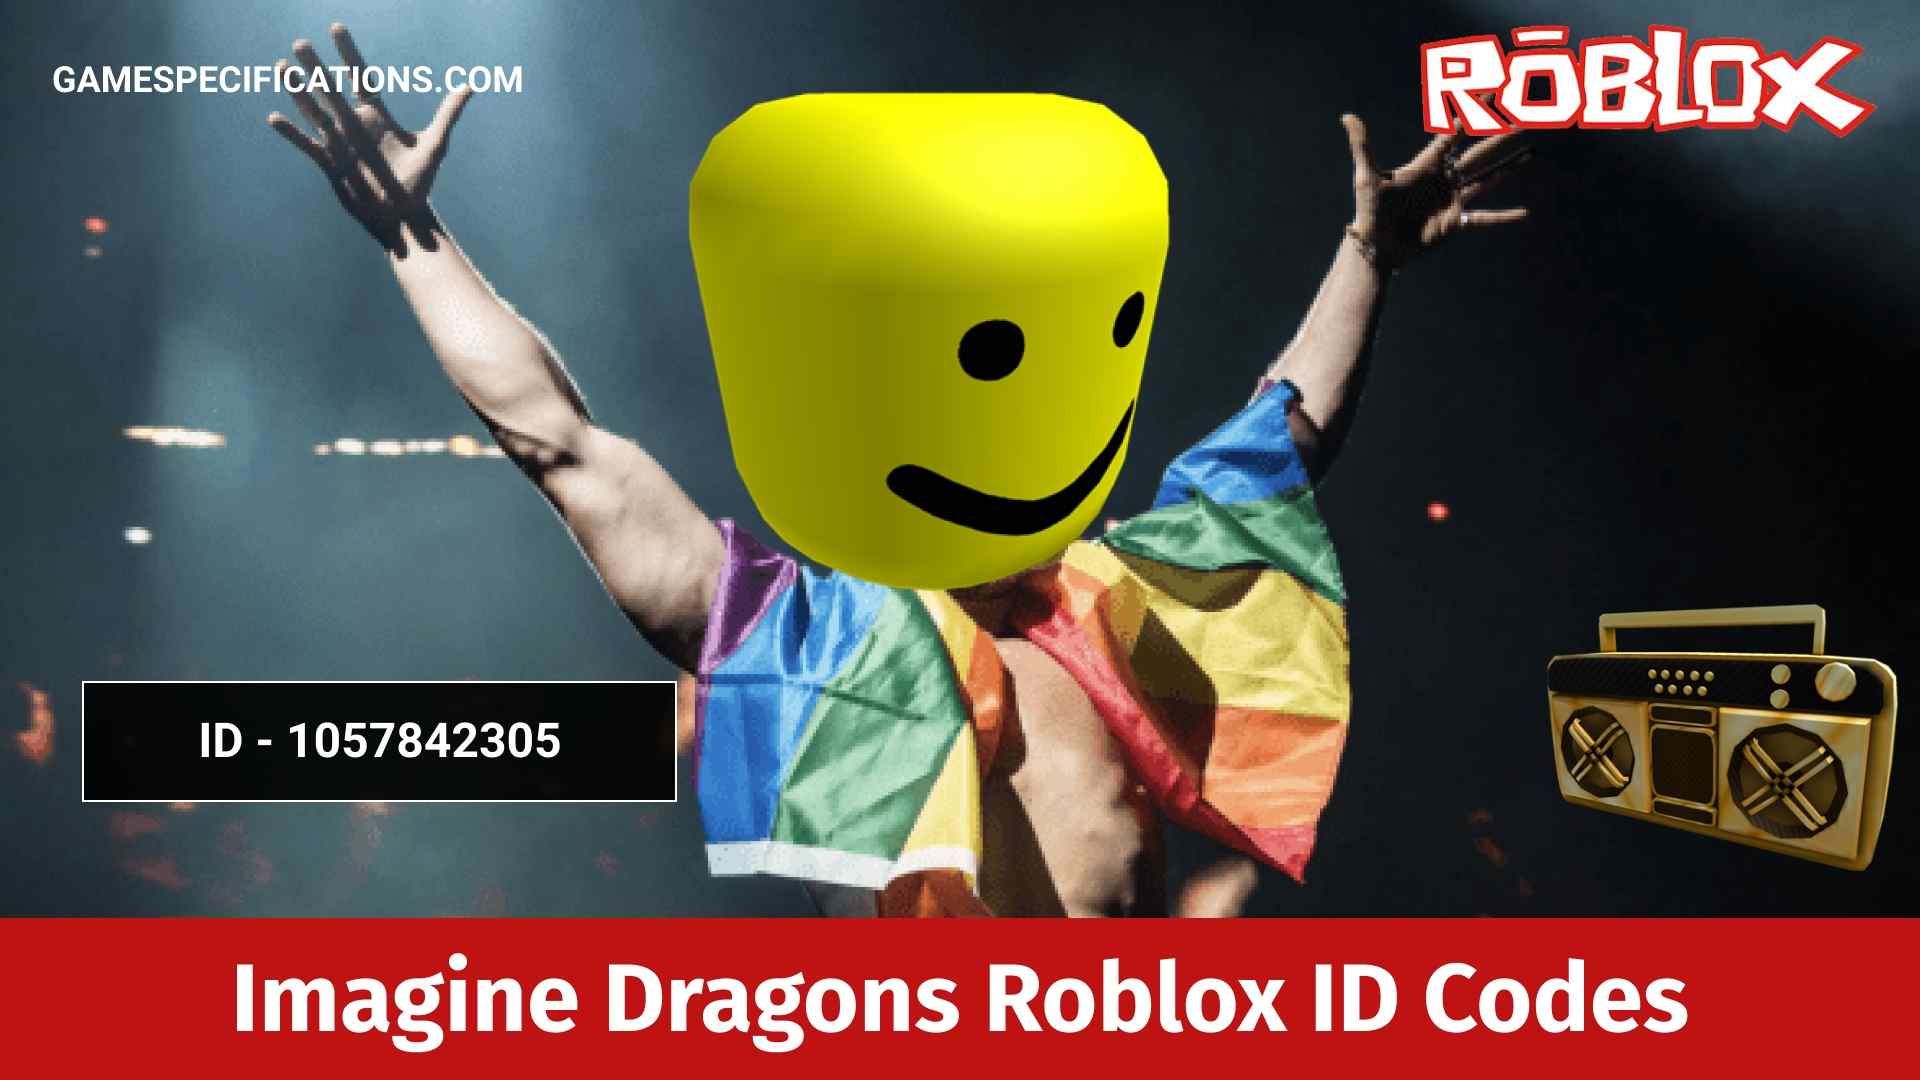 50 Imagine Dragons Roblox Id Codes 2021 Game Specifications - roblox cat mask id